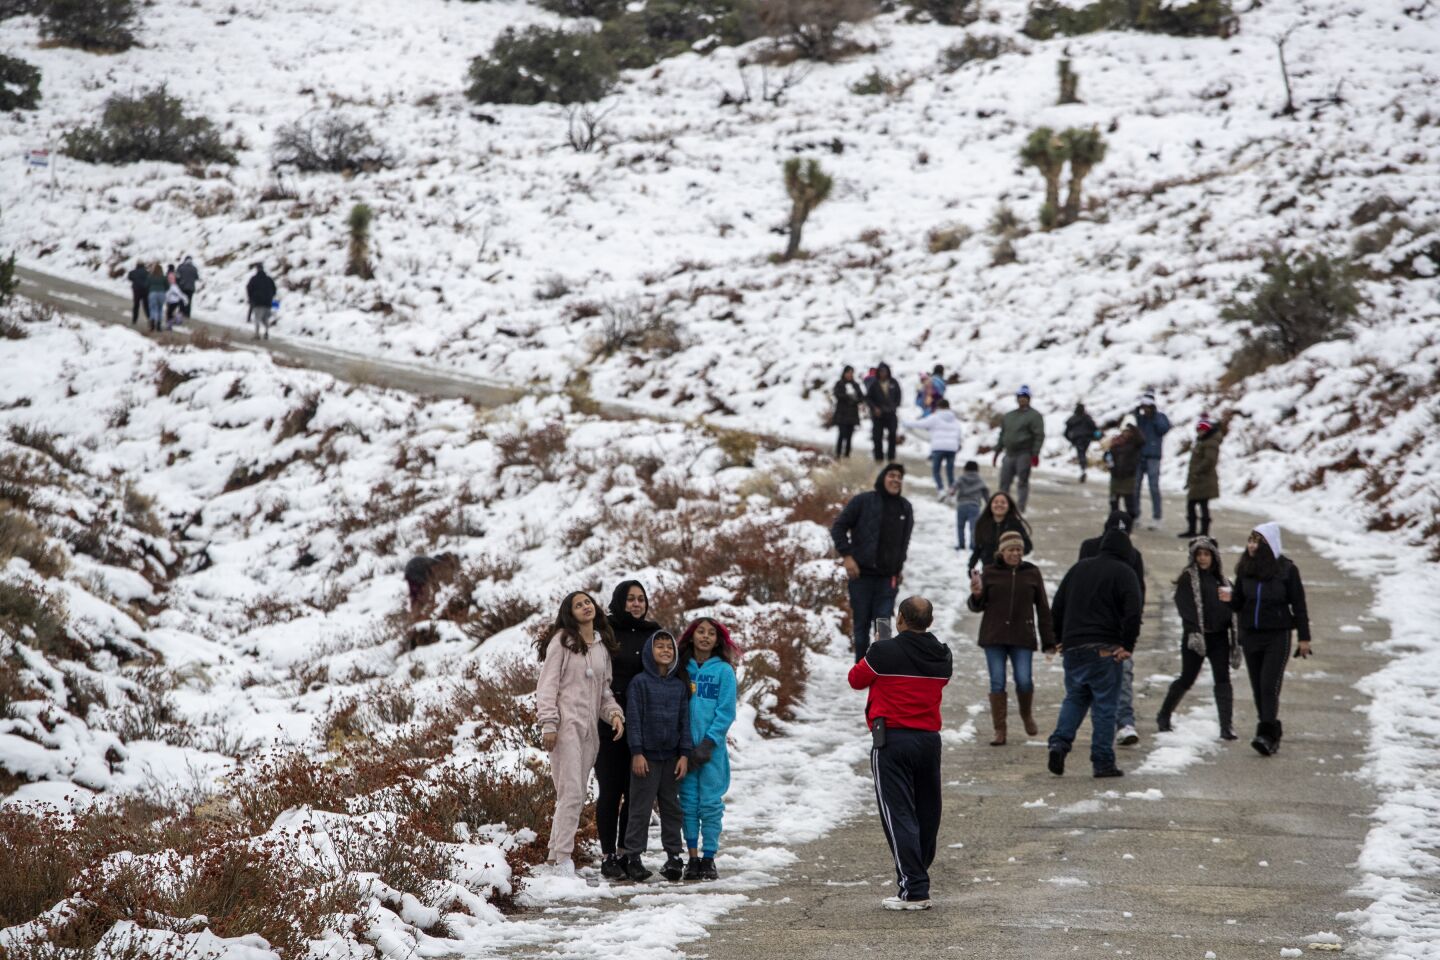 Dozens of people frolic around lingering high desert snow on Tierra Subida Ave. in the Antelope Valley town of Palmdale in Palmdale, Calif., on Dec. 1, 2019.